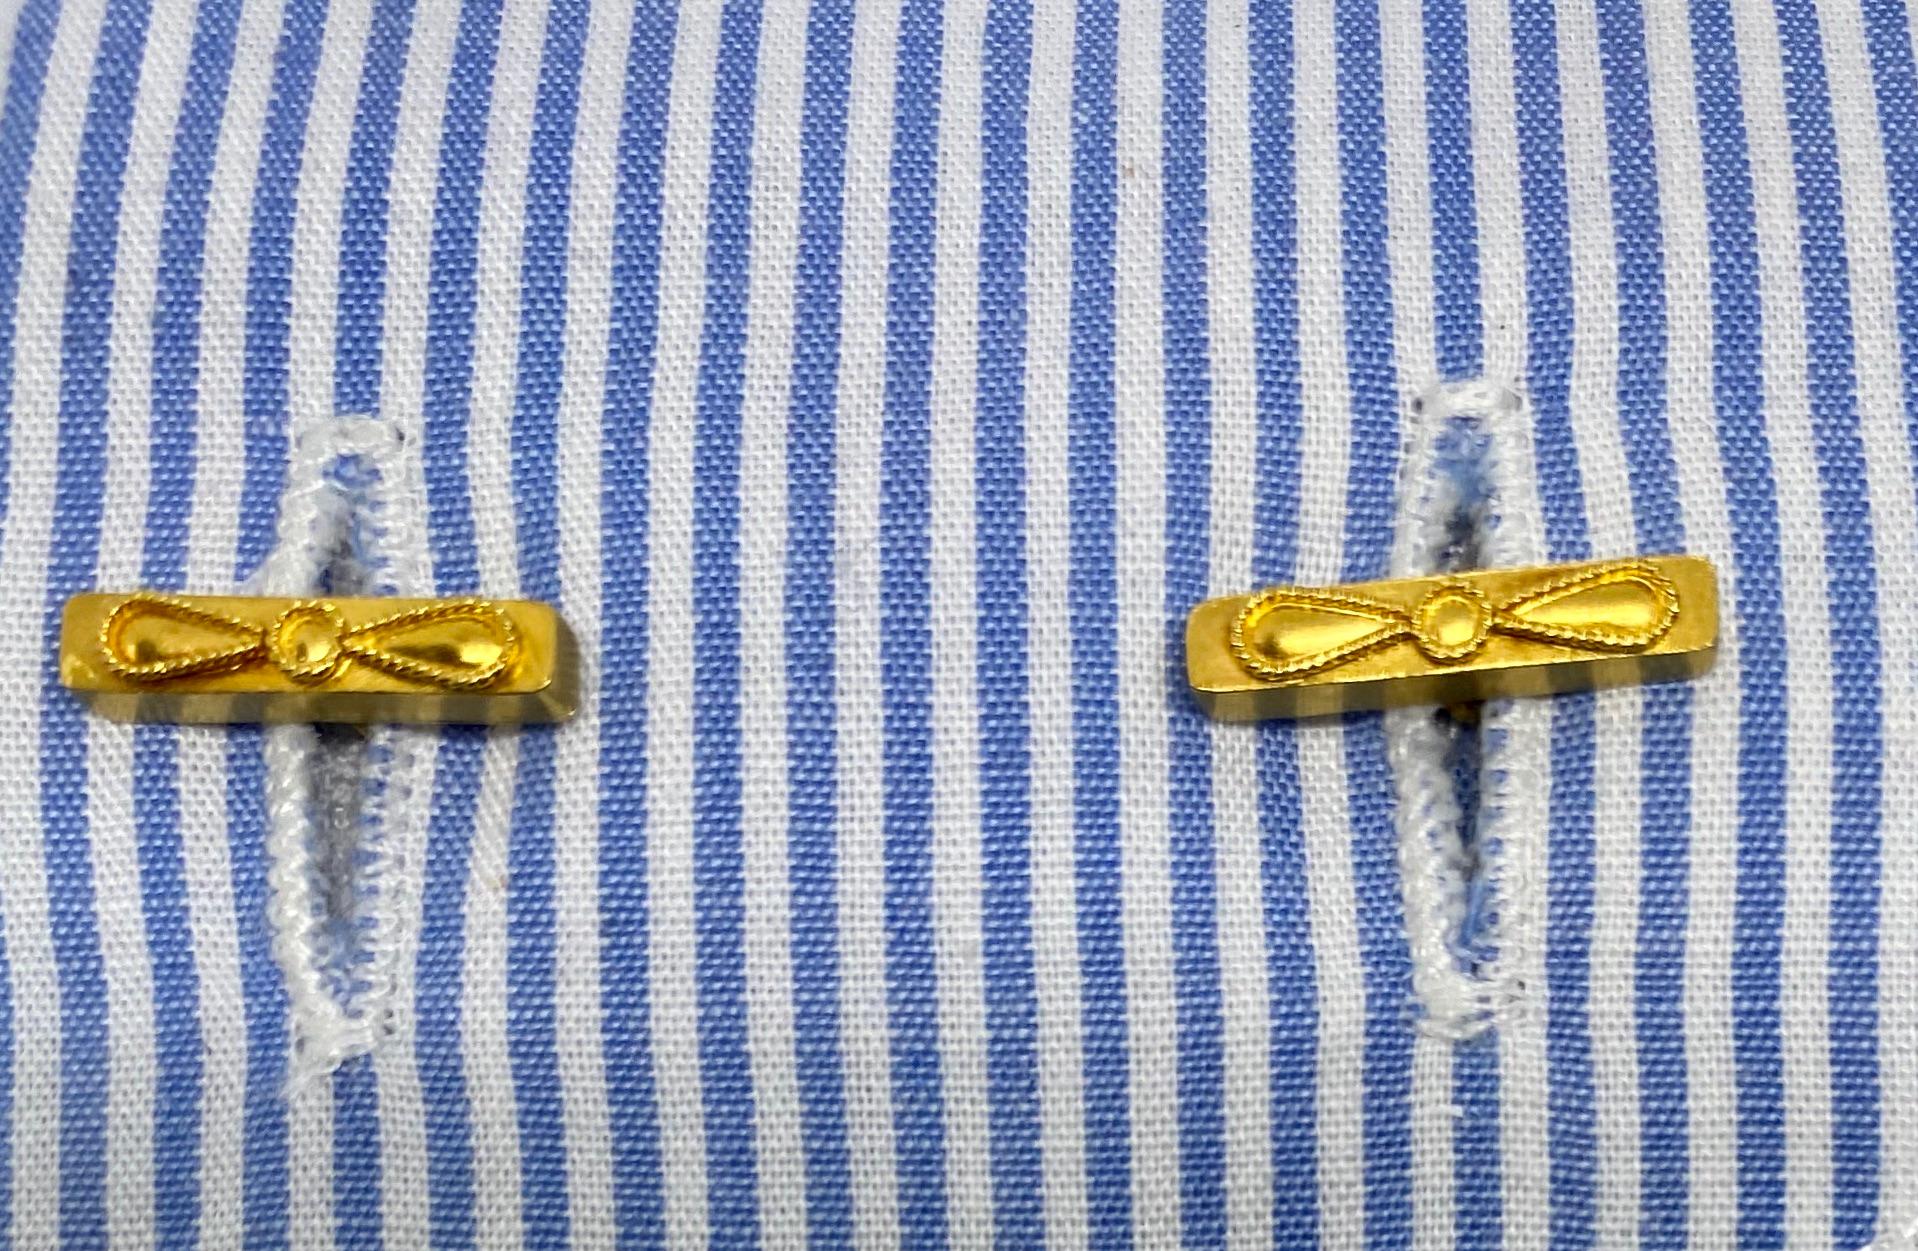 Square Cut Square Cufflinks in 22 Karat Yellow Gold with Blue Sapphires